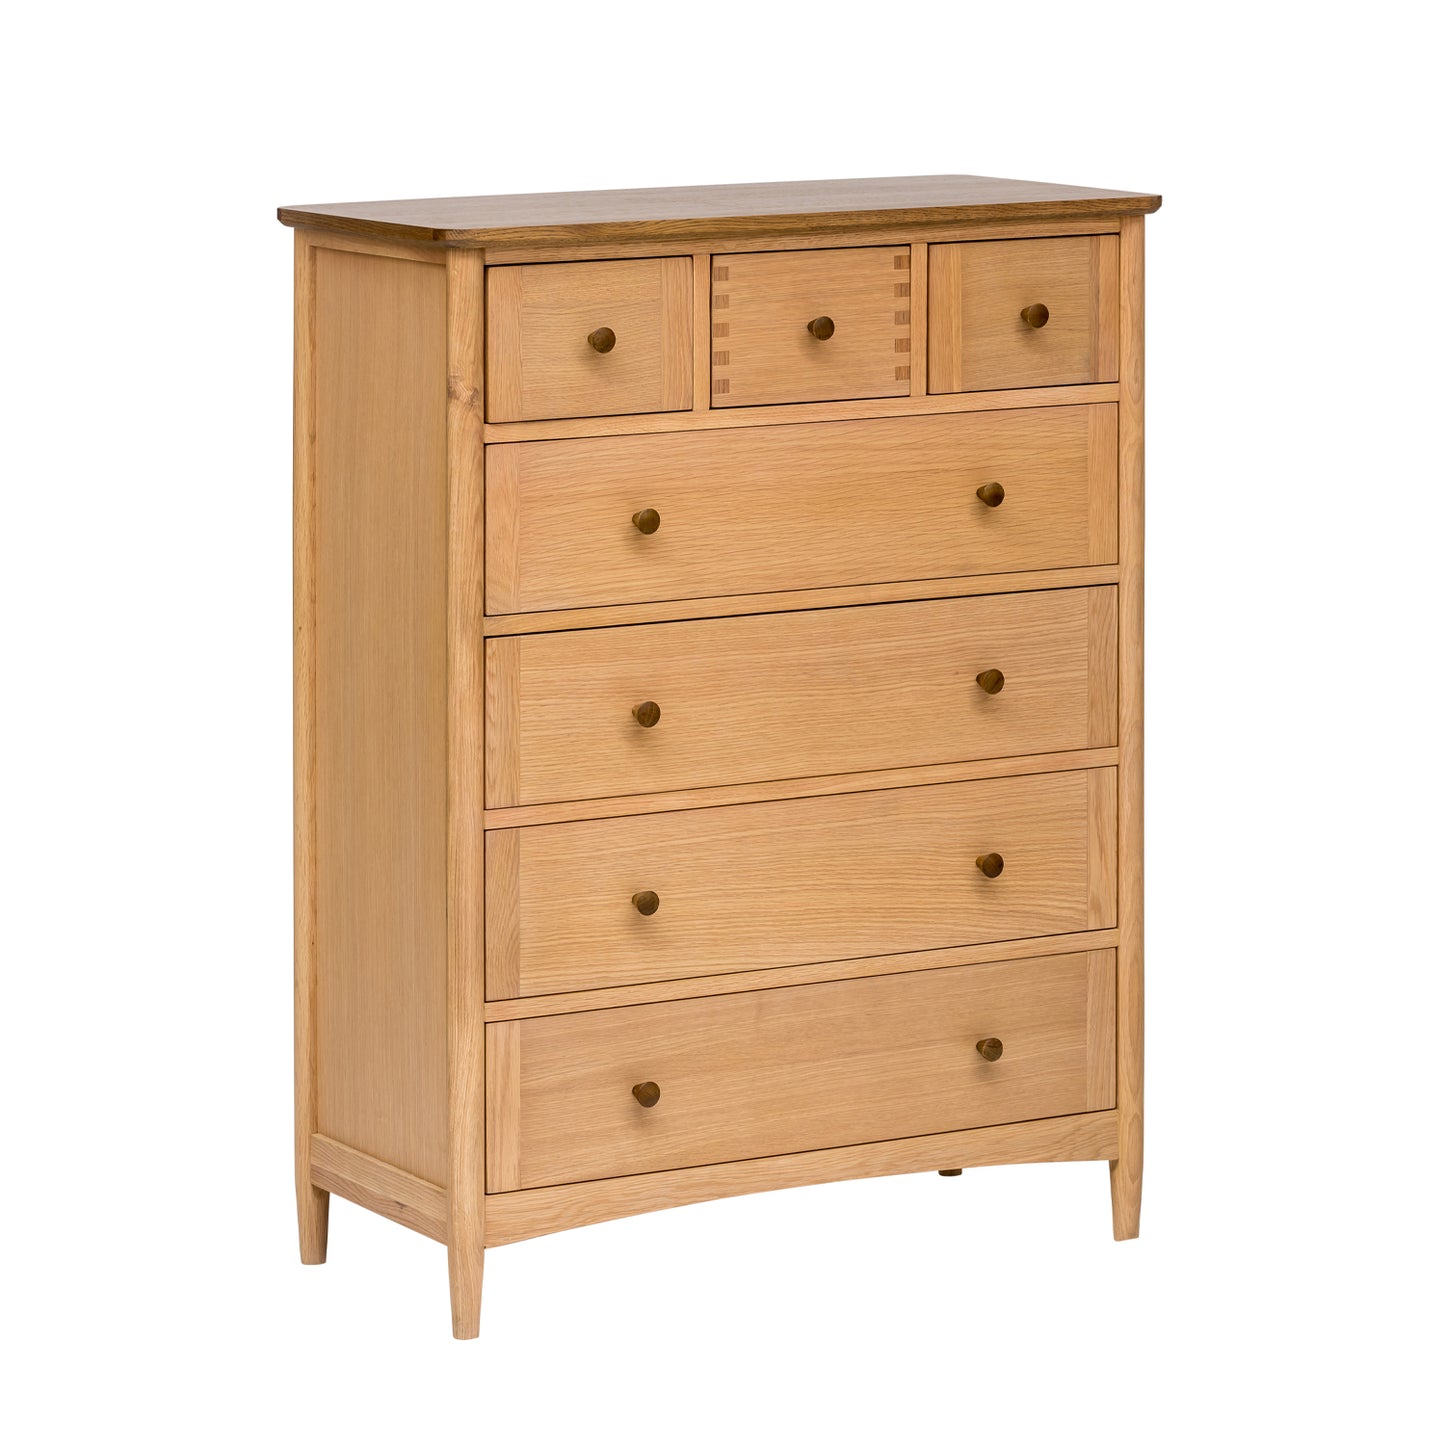 Henley Chest of Drawers - 3+4